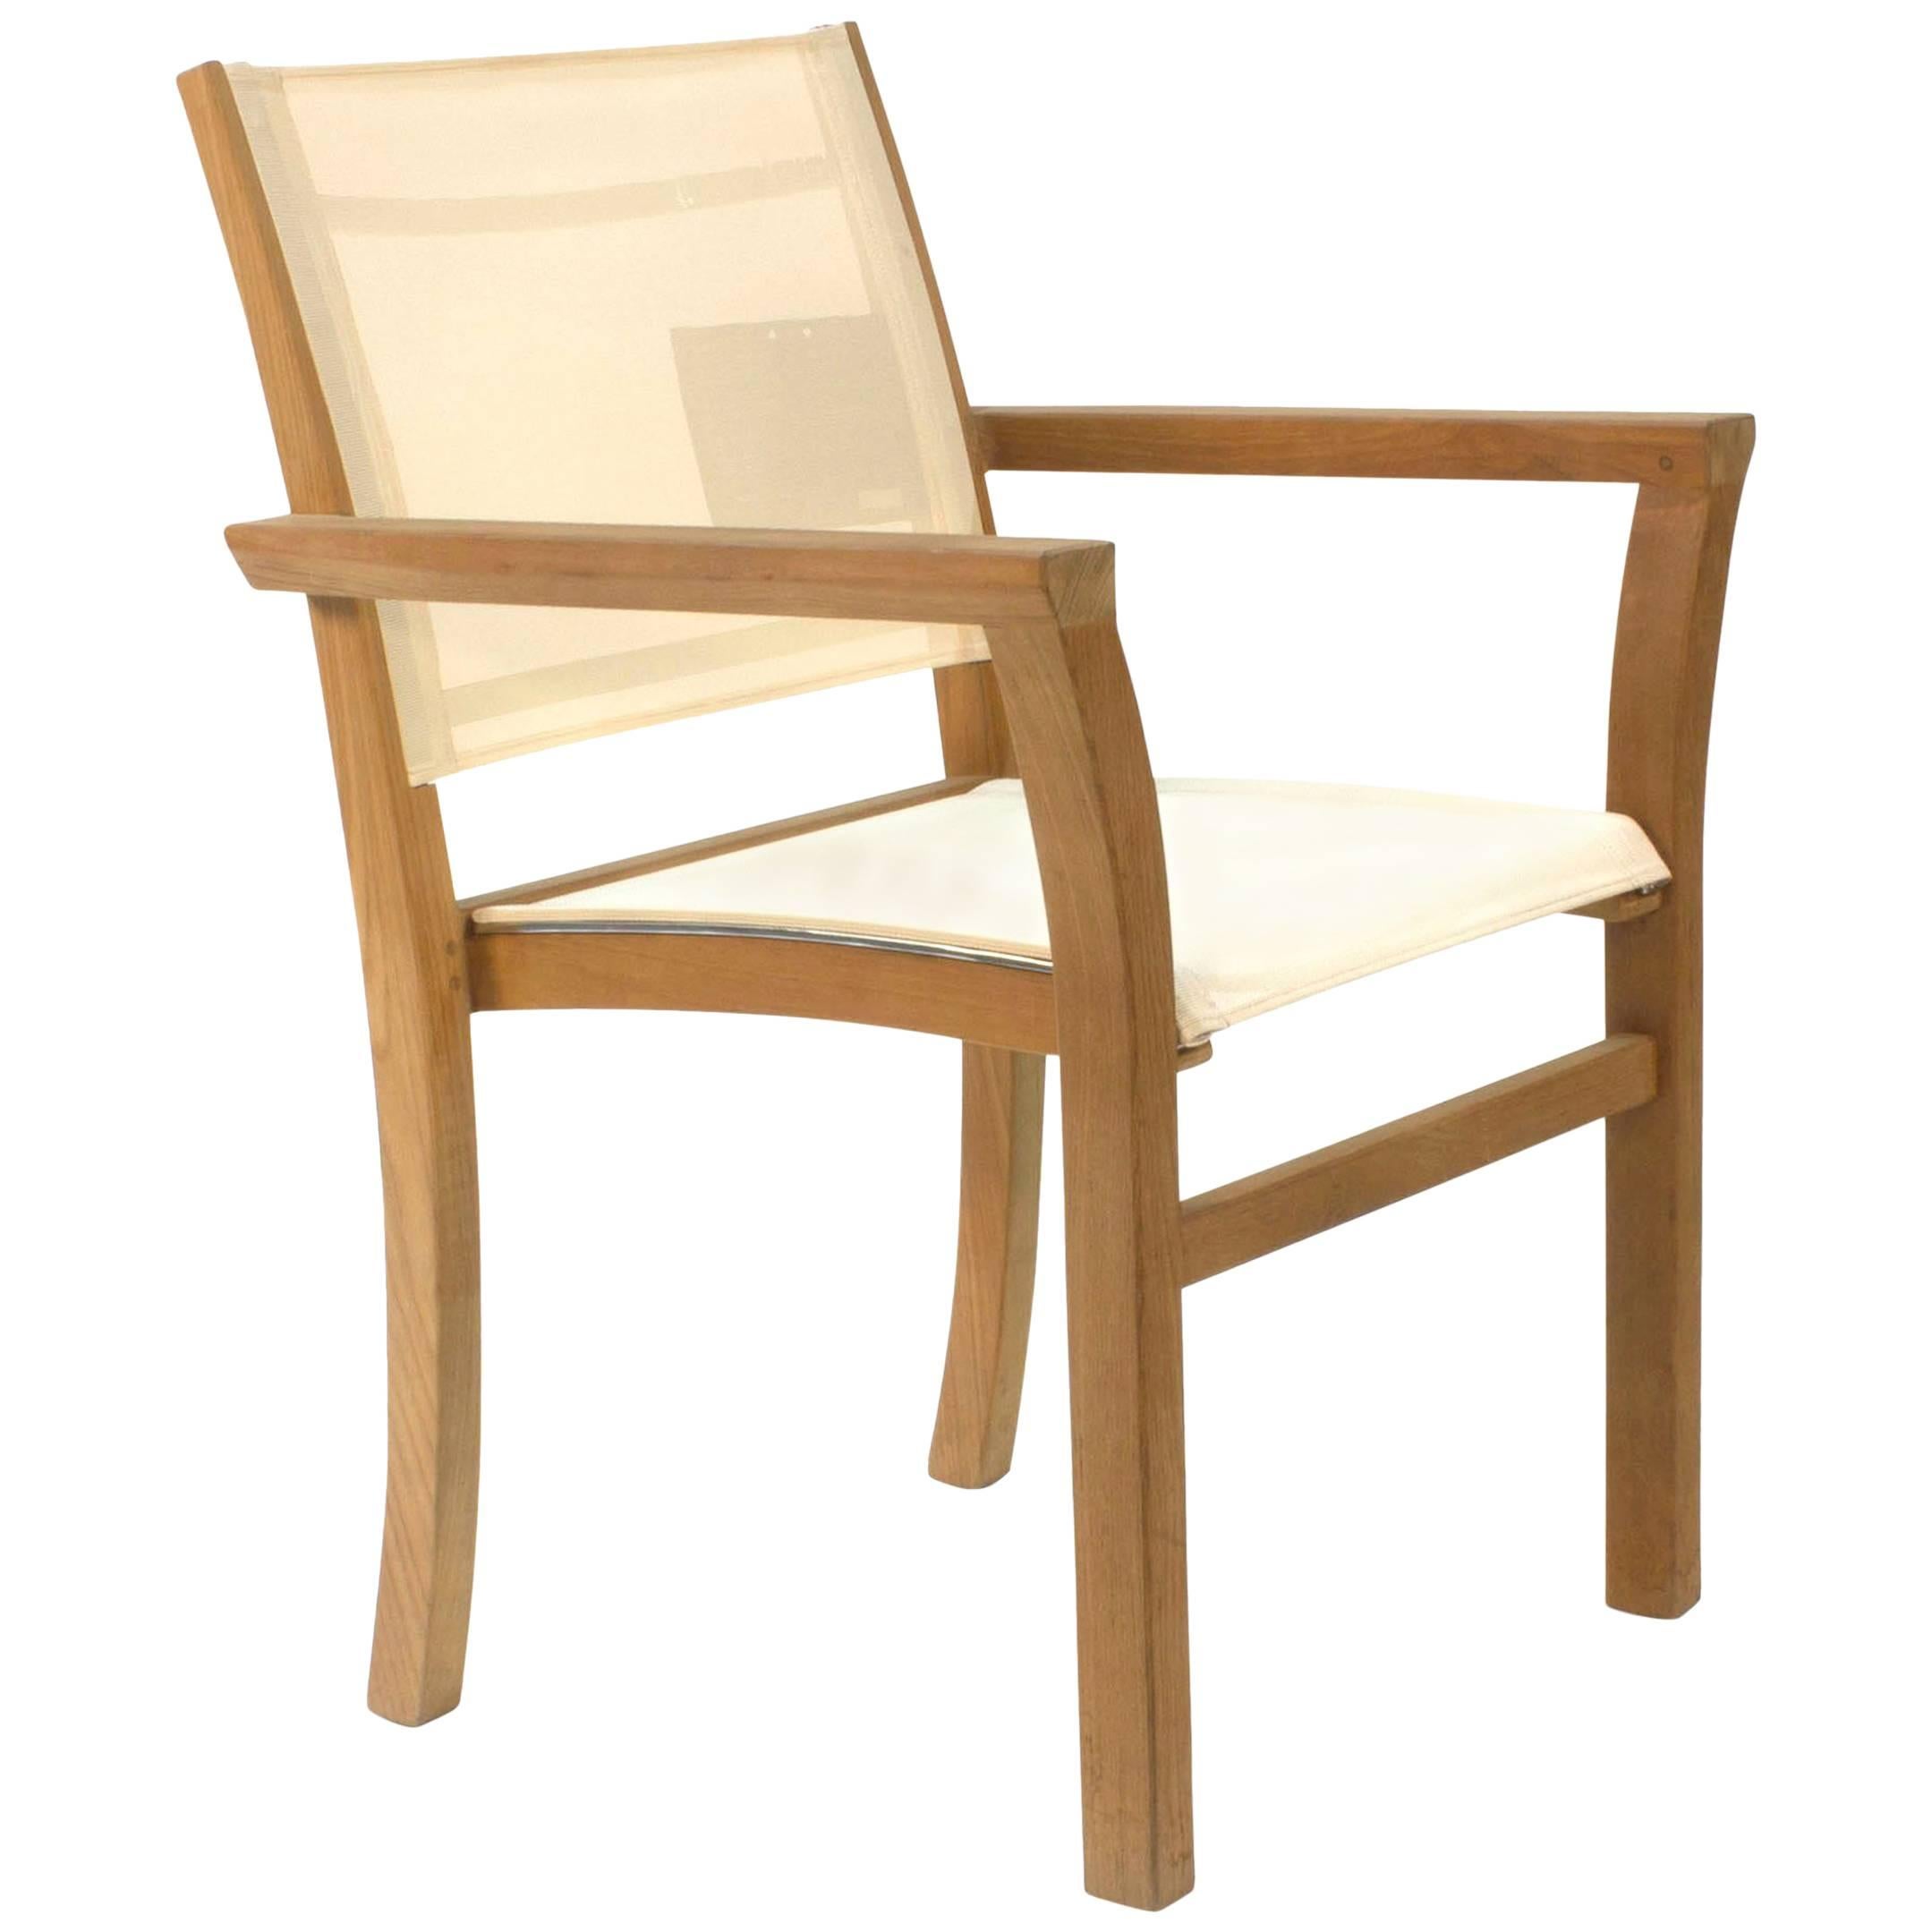 White Mixt 55 Teak Outdoor Dining Armchair by Royal Botania, Belgium For Sale